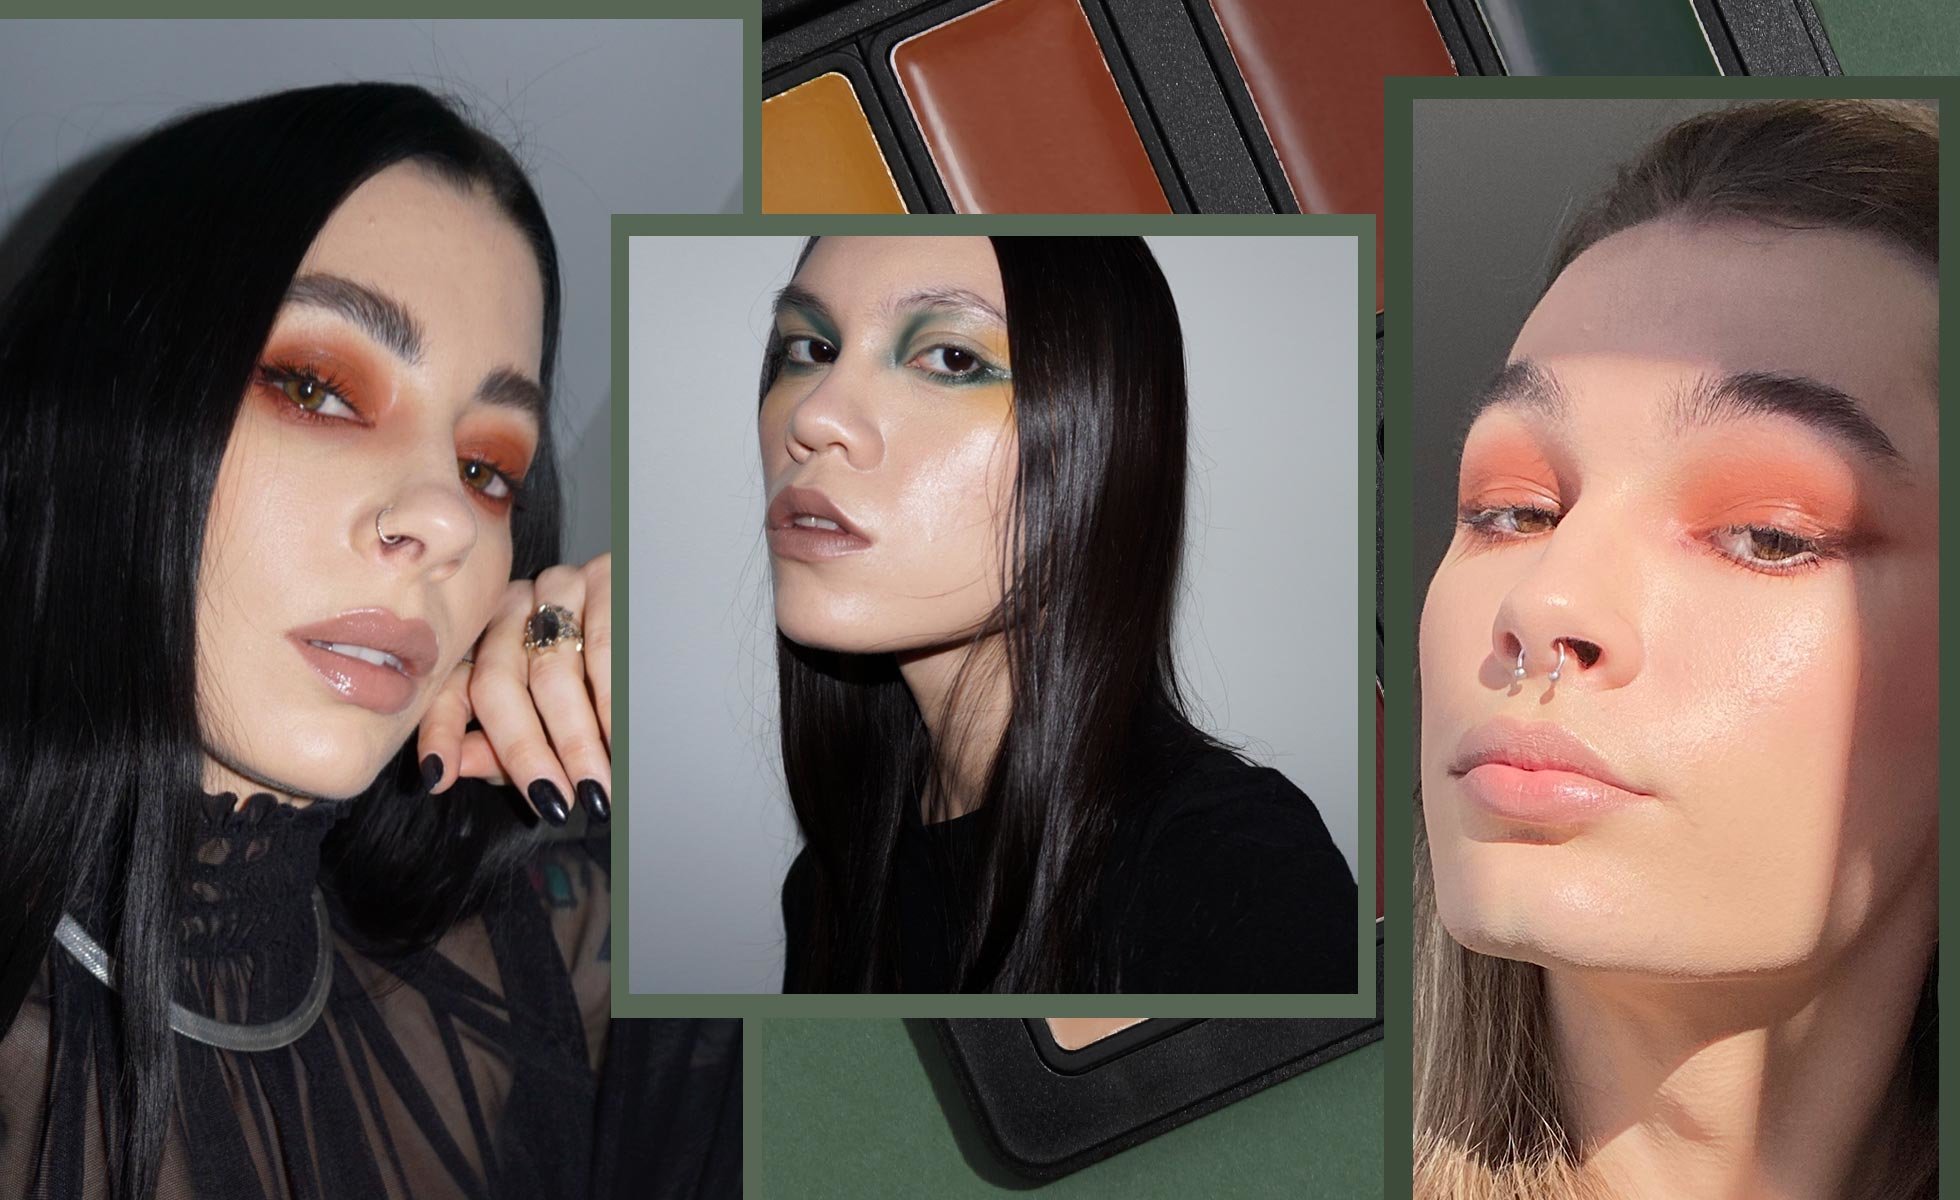 Soft-Goth Glam Is Modern, Wearable & Currently Trending